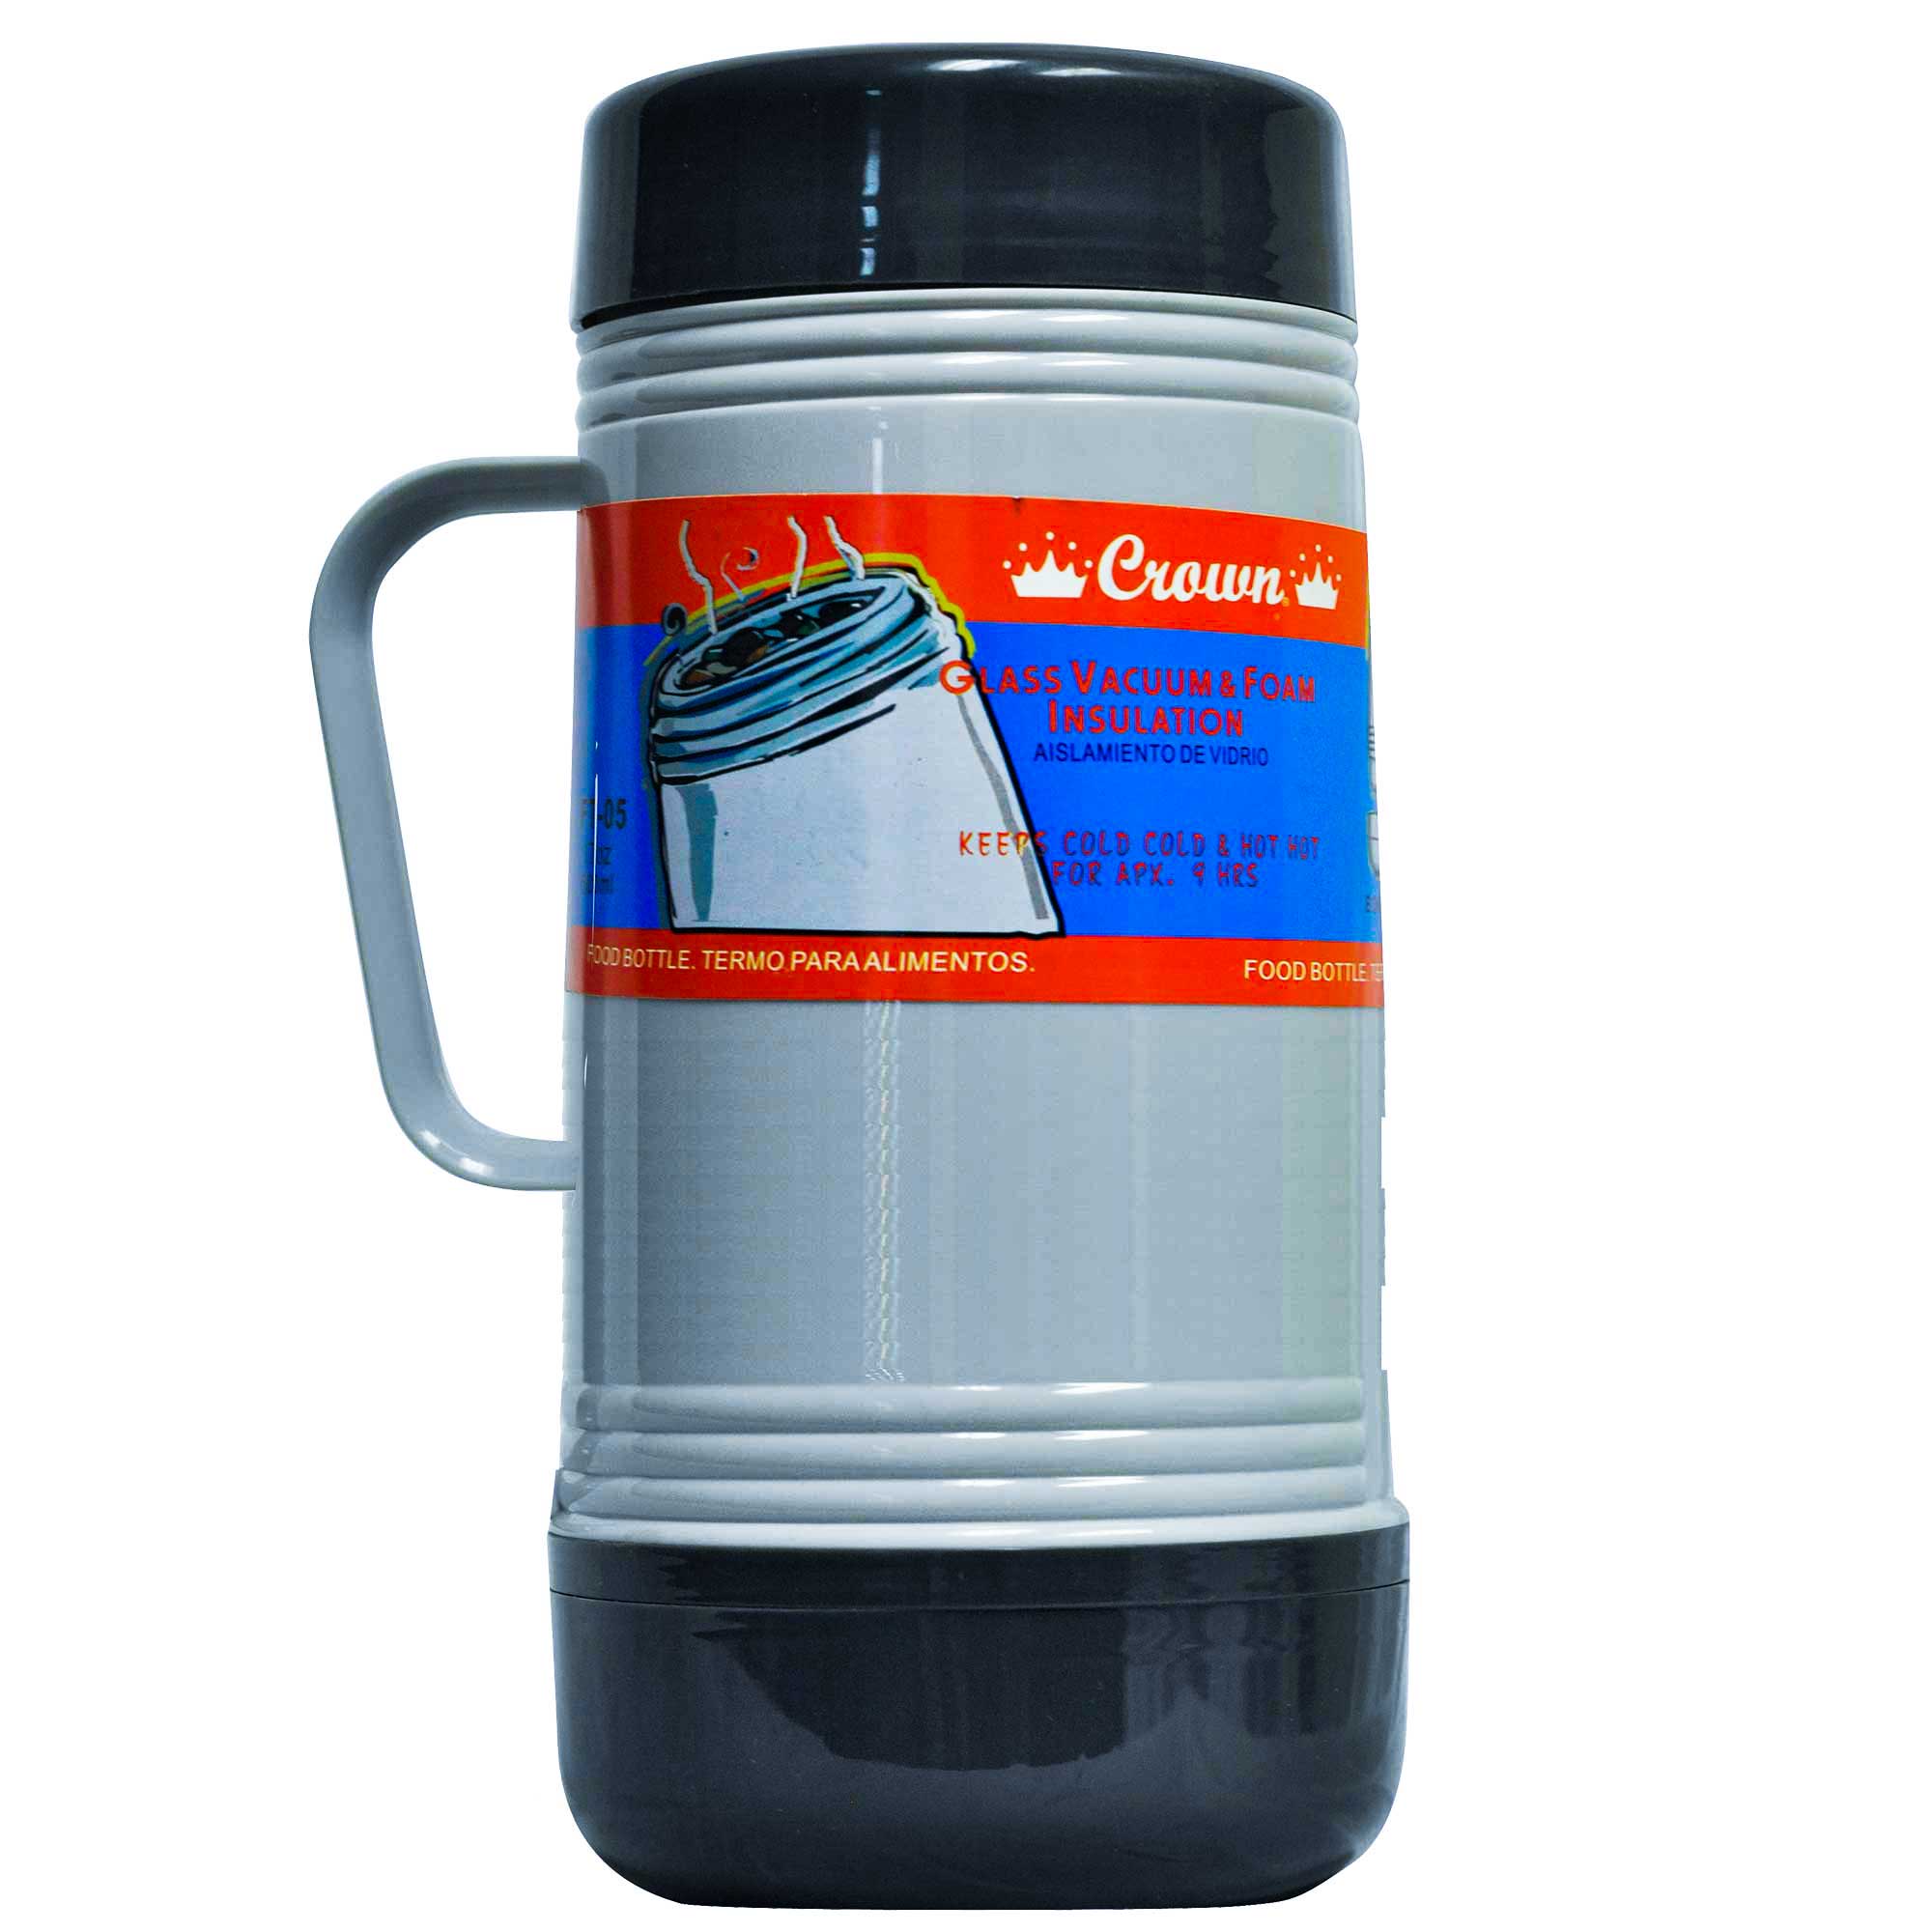 Vacuum Insulated Lunch Jars Category